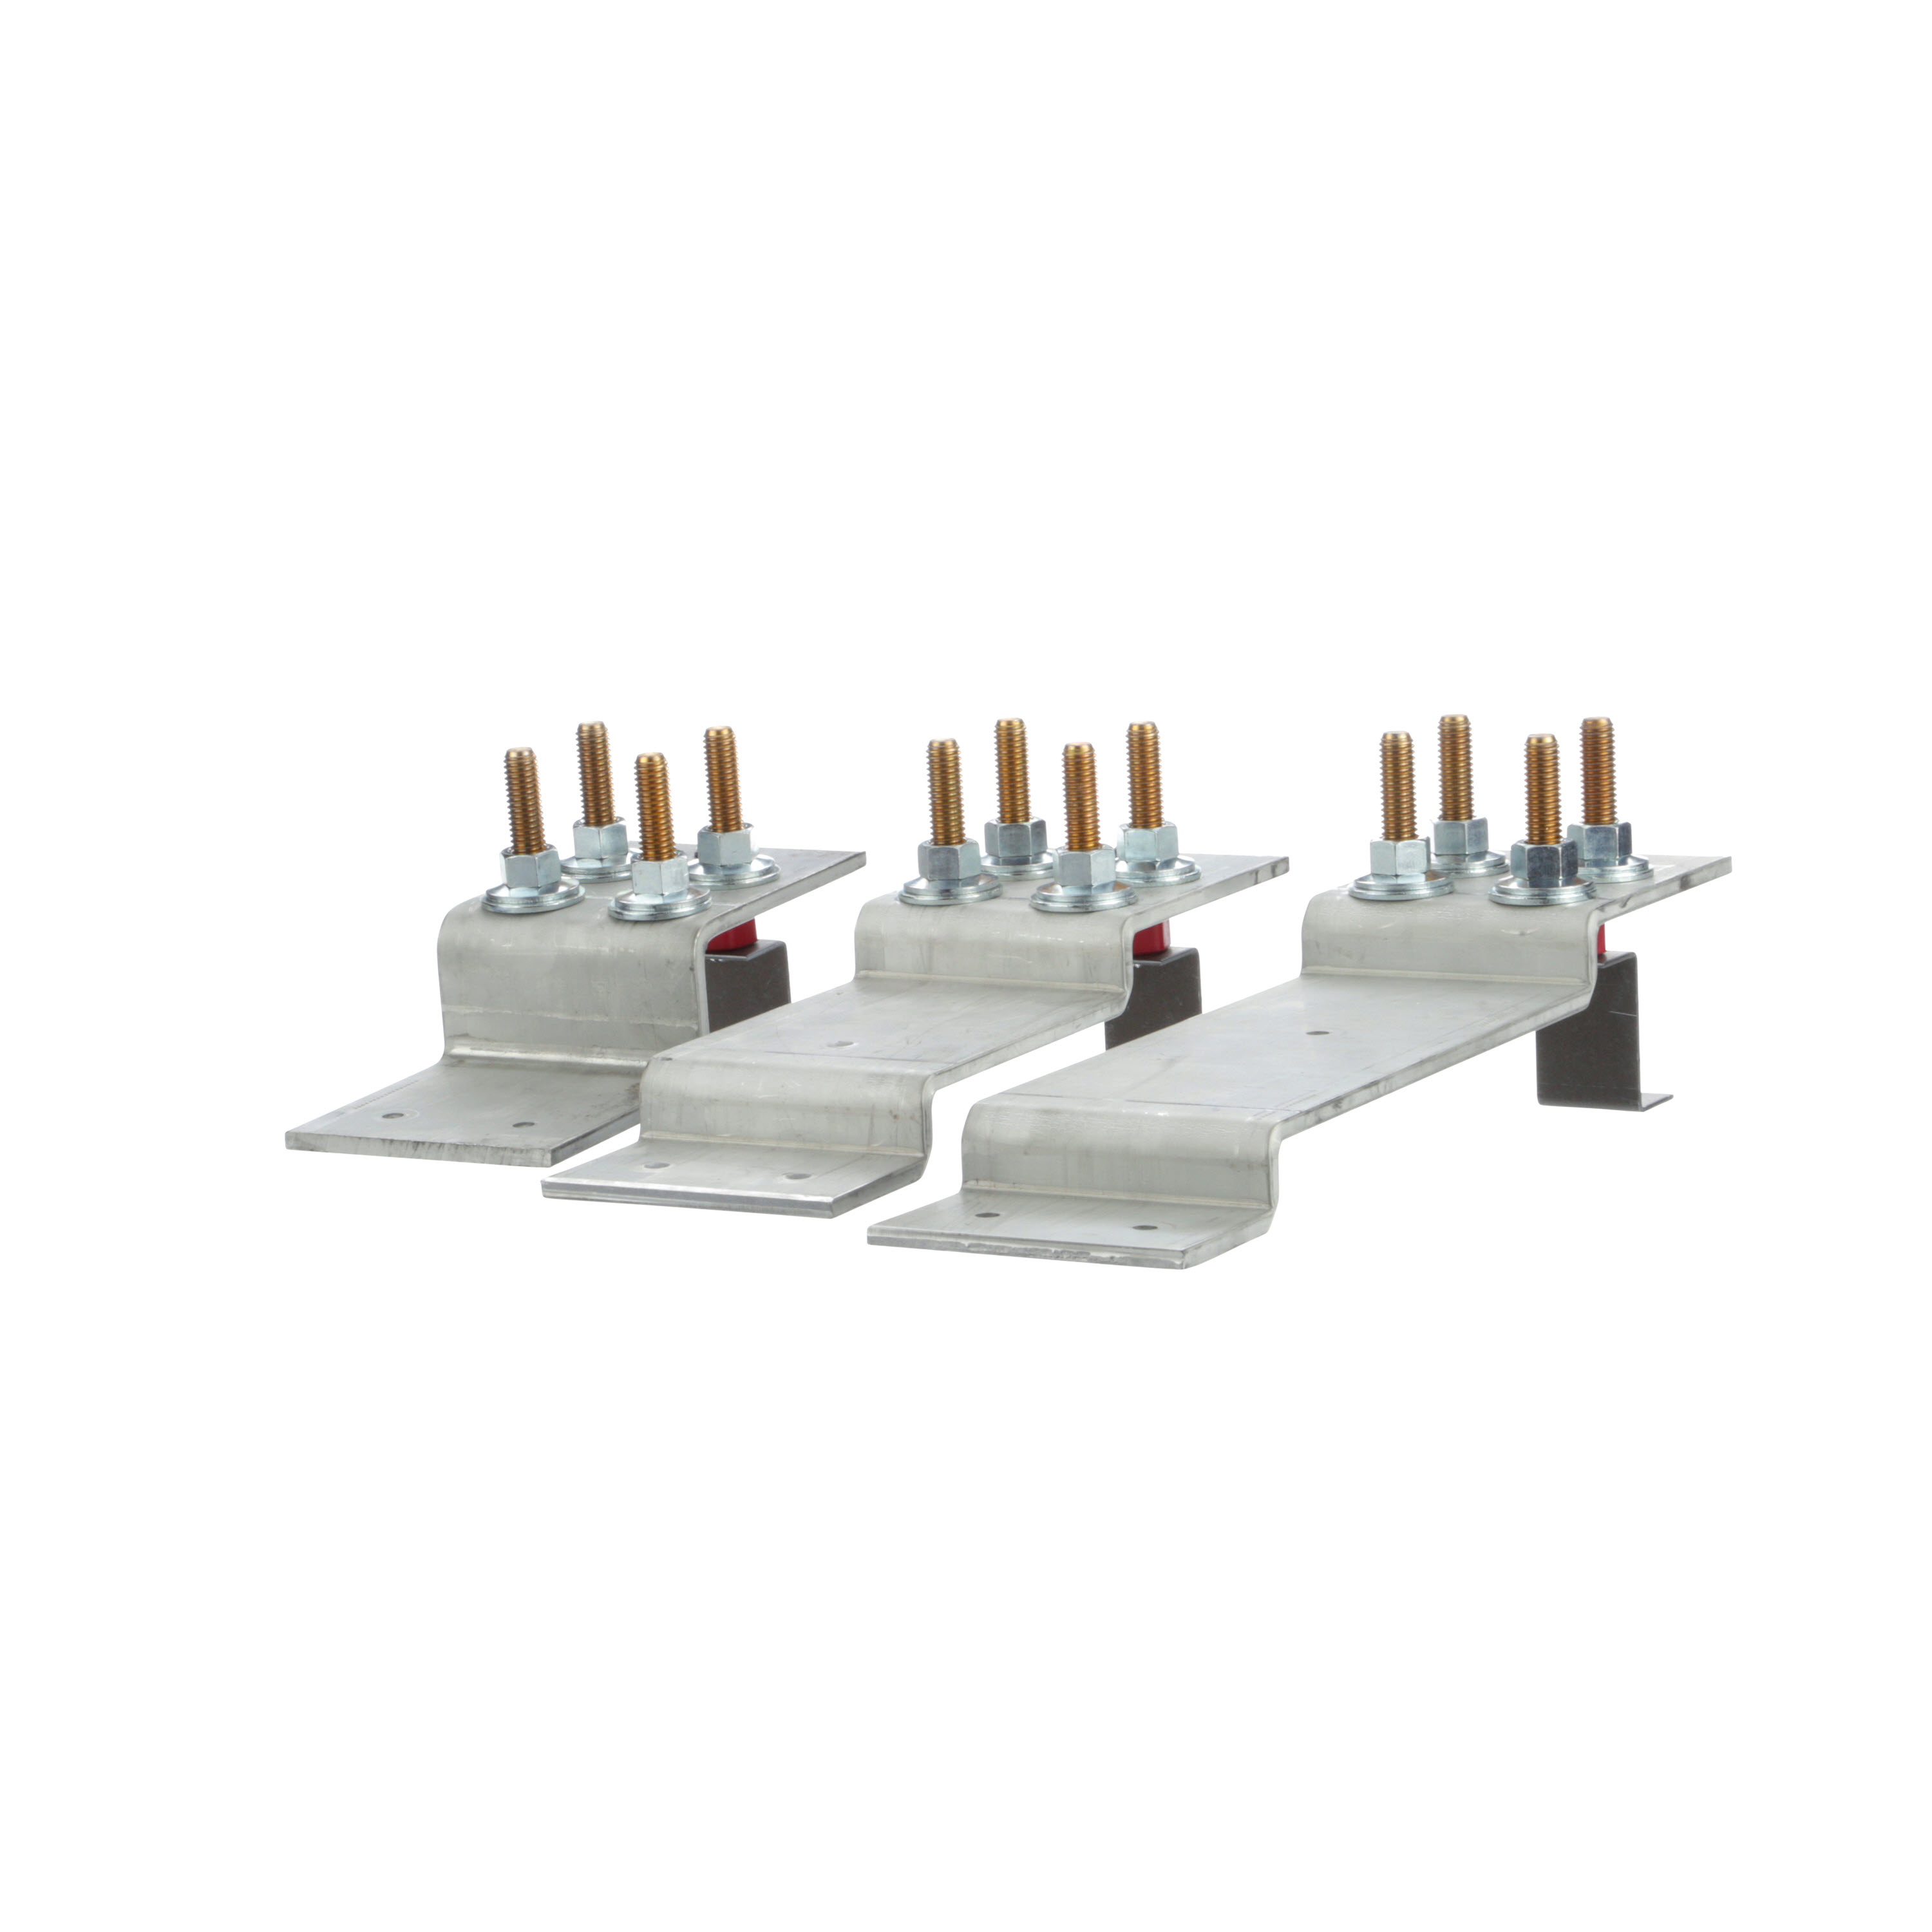 Siemens Low Voltage s Multi-Family Metering Line of Power Mod Accessories and Replacement Parts as part of the Power Mod Accessories and Replacement Parts Group. Type UNI-PAK Features STUD KIT Appn GARDEN - STYLE Std UL-50,67,414 A. Rating600A Size 6.000x16 .000x25.000. Insulated. Mounting WALL MOUNTED